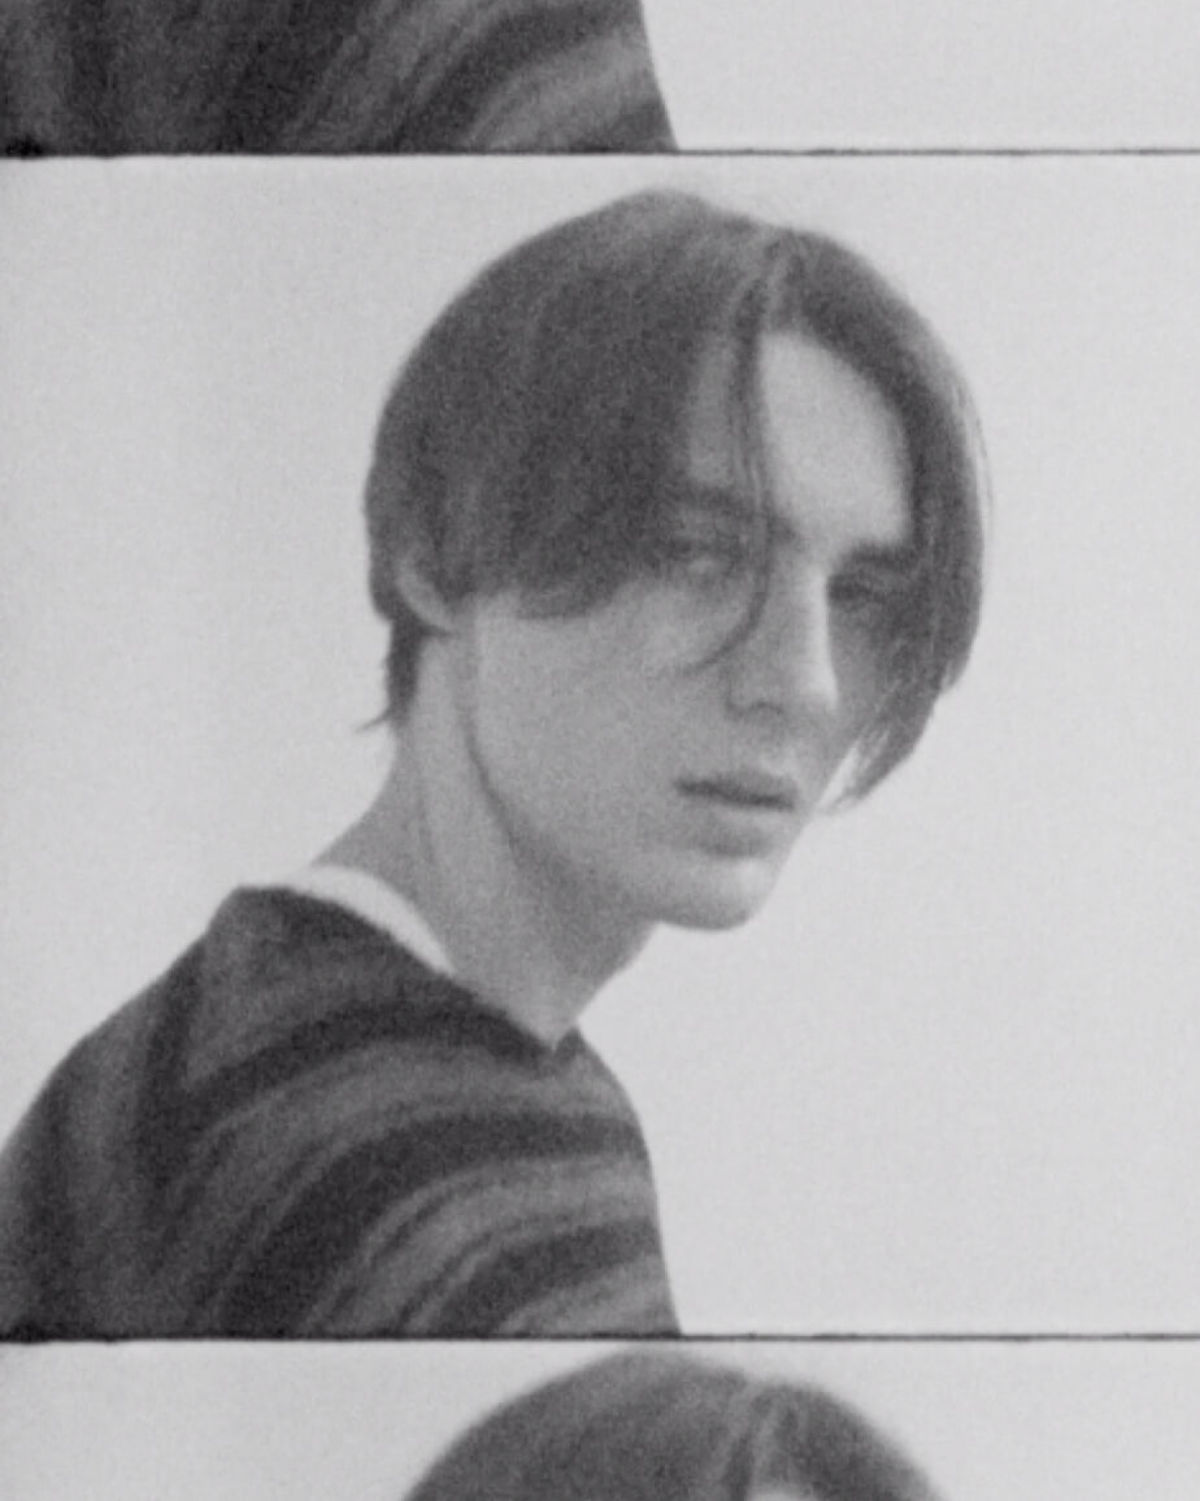 Video placeholder. Black and white close up portrait of a man wearing a striped jumper over a white t-shirt.